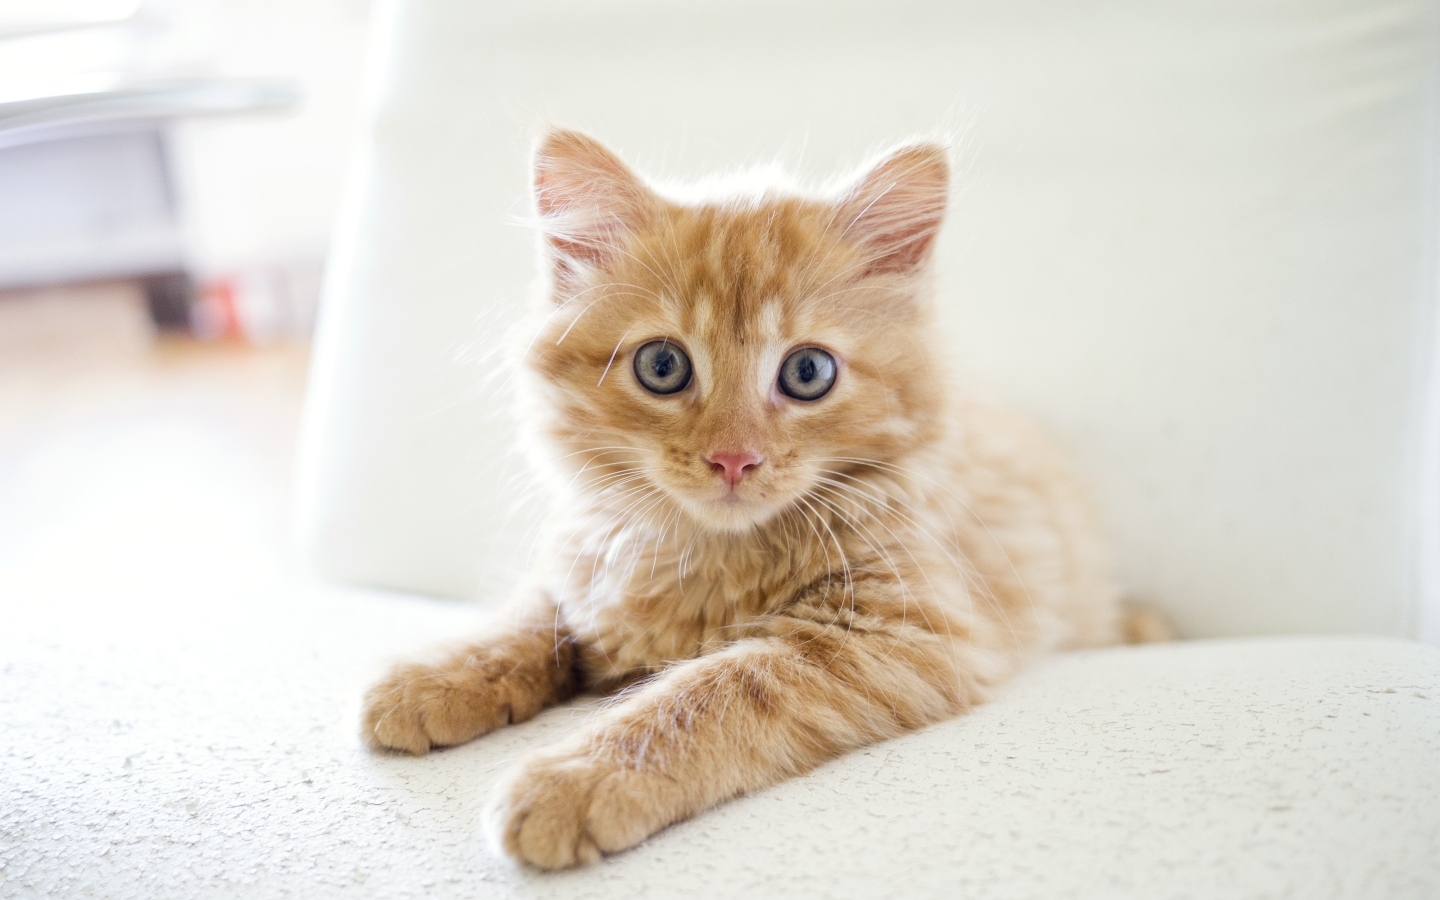 Surprised look of a small red kitten